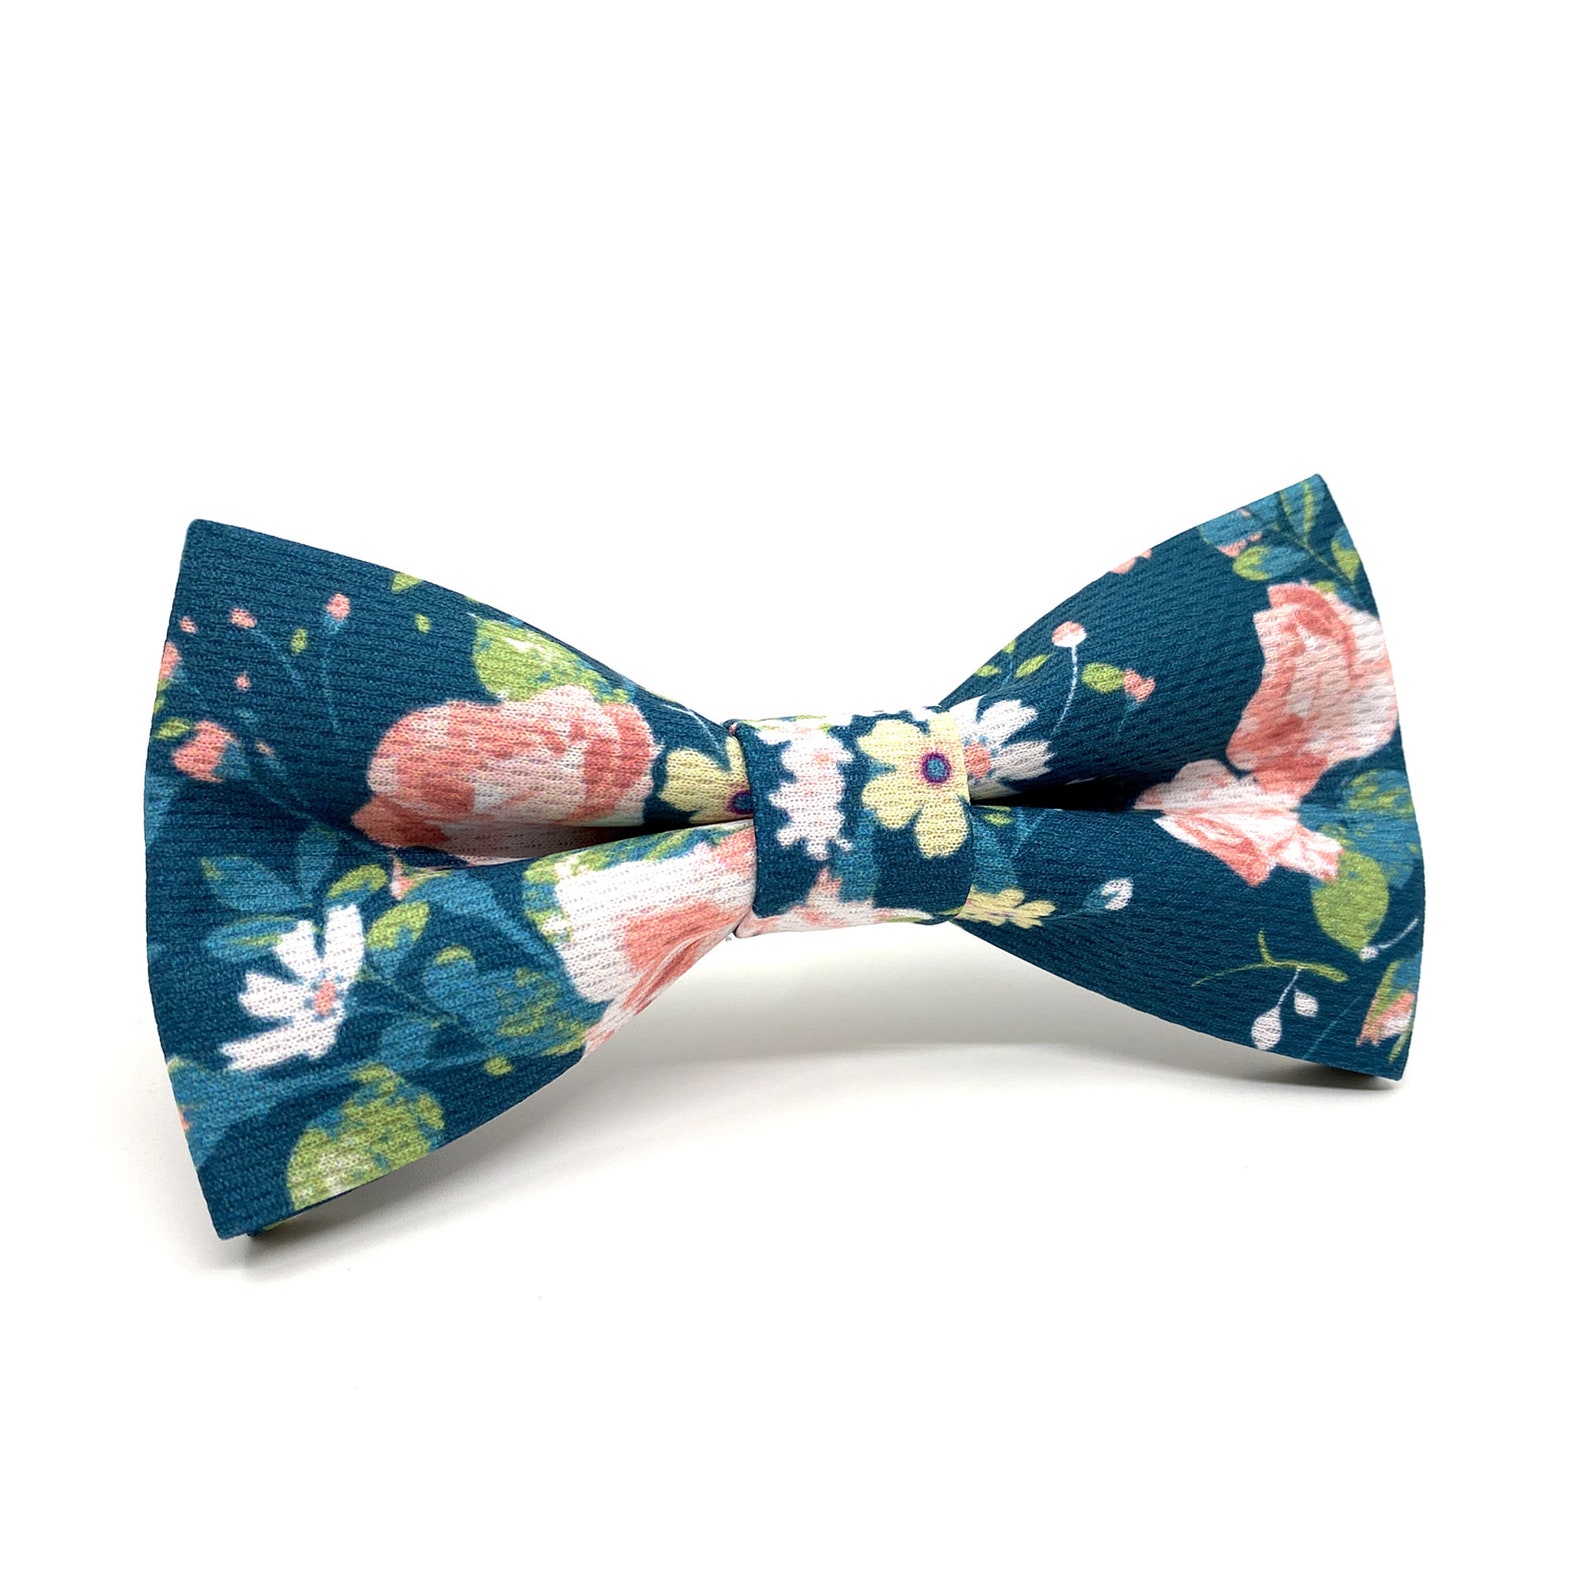 Teal Green Bow Tie Pink Floral Bow Tie Bow Ties for Men Bow - Etsy